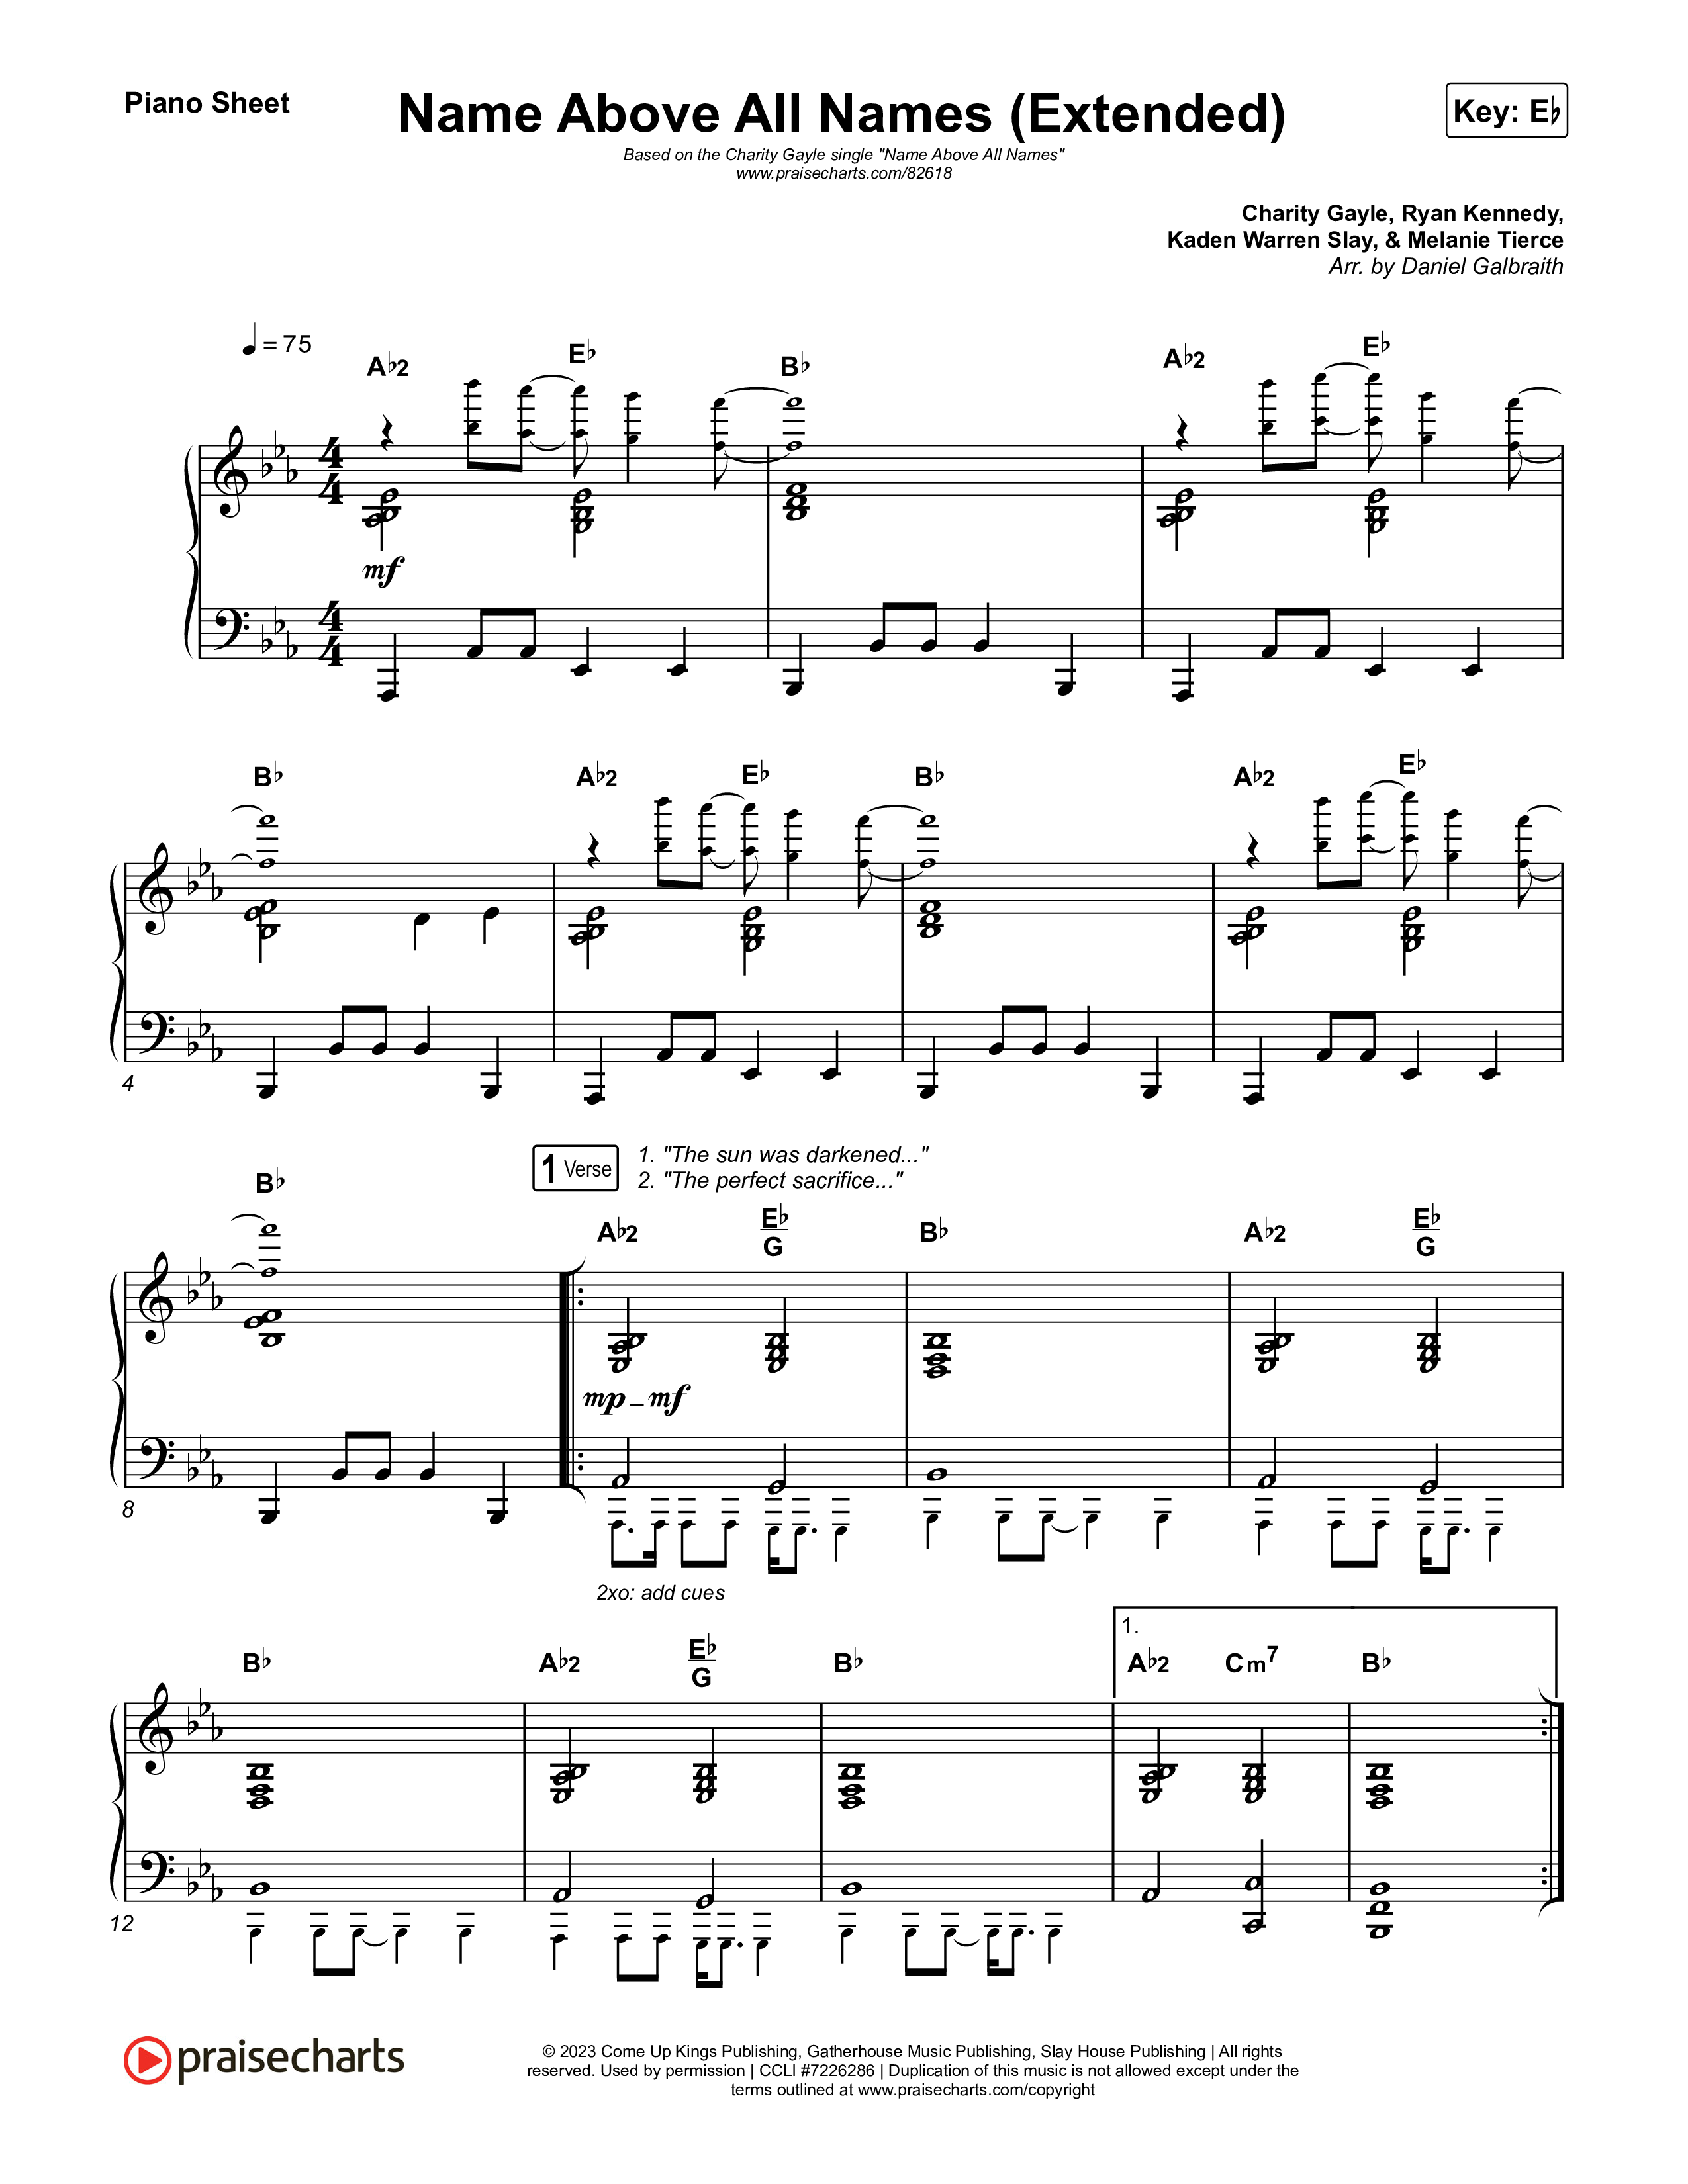 Name Above All Names (Extended) Piano Sheet (Charity Gayle)